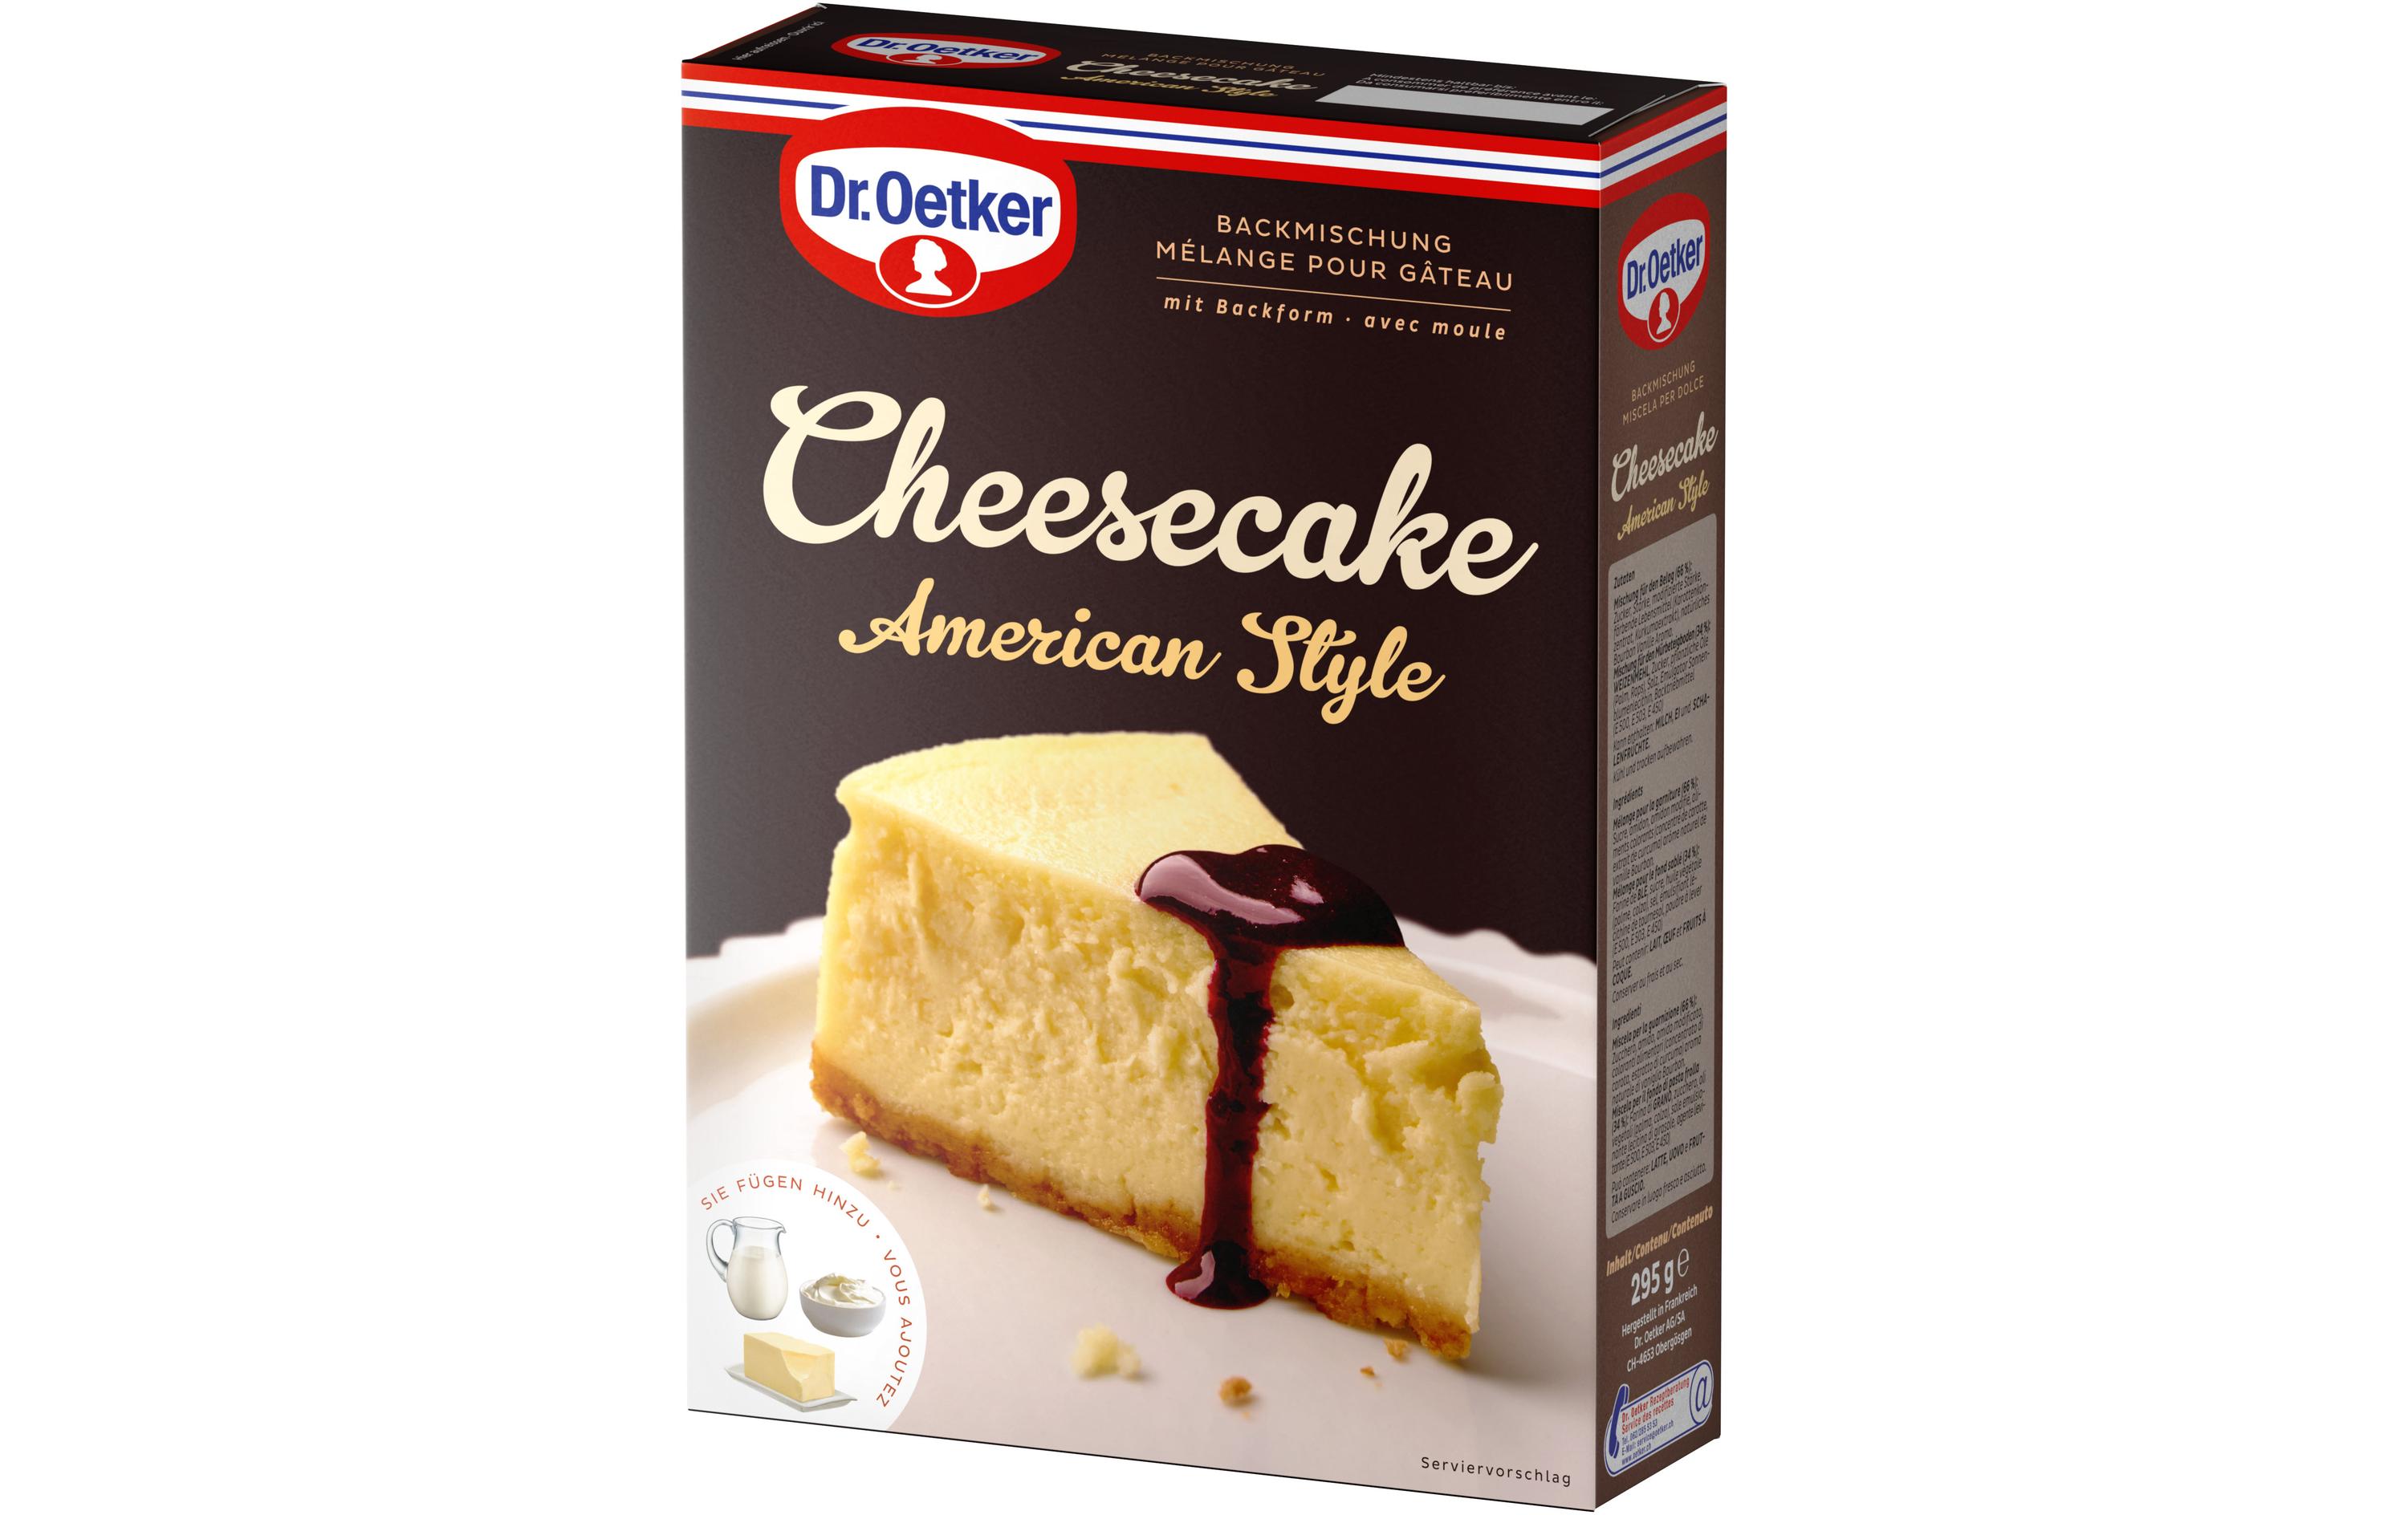 Dr.Oetker Backmischung Cheesecake American Style 295 g